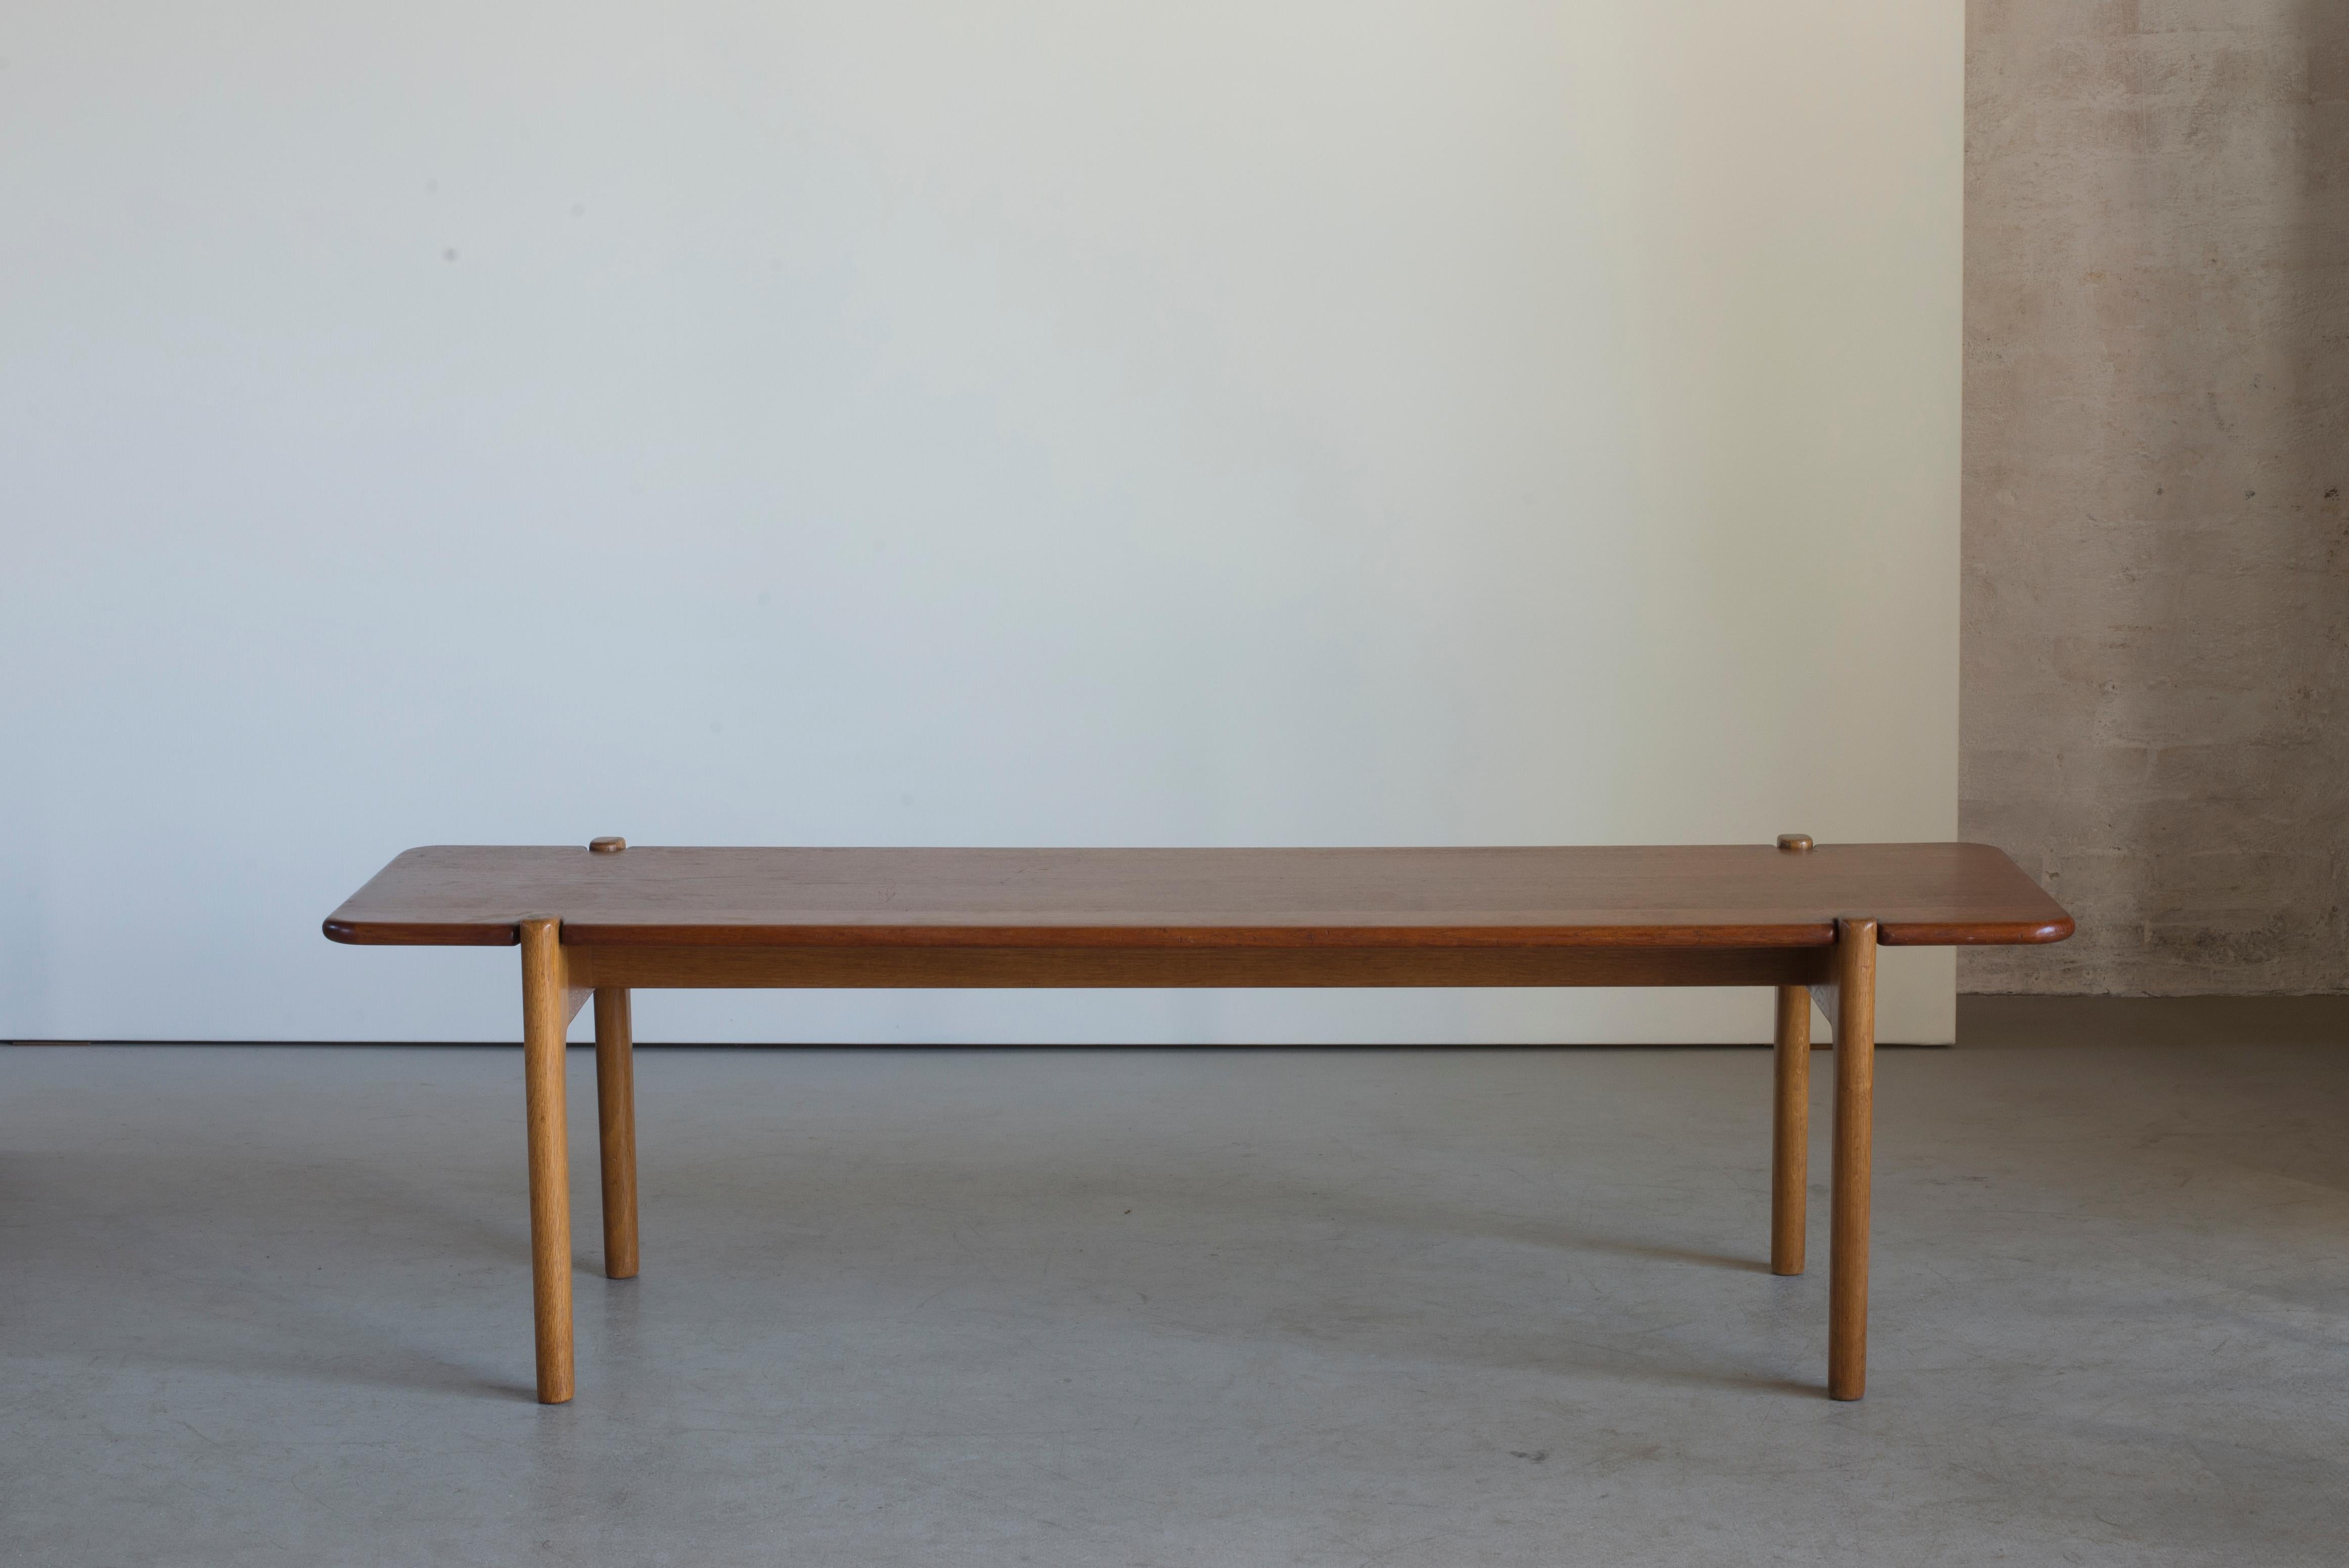 Bench or occasional table by Hans J. Wegner. Executed by Johannes Hansen, Denmark.

Oak and teak.